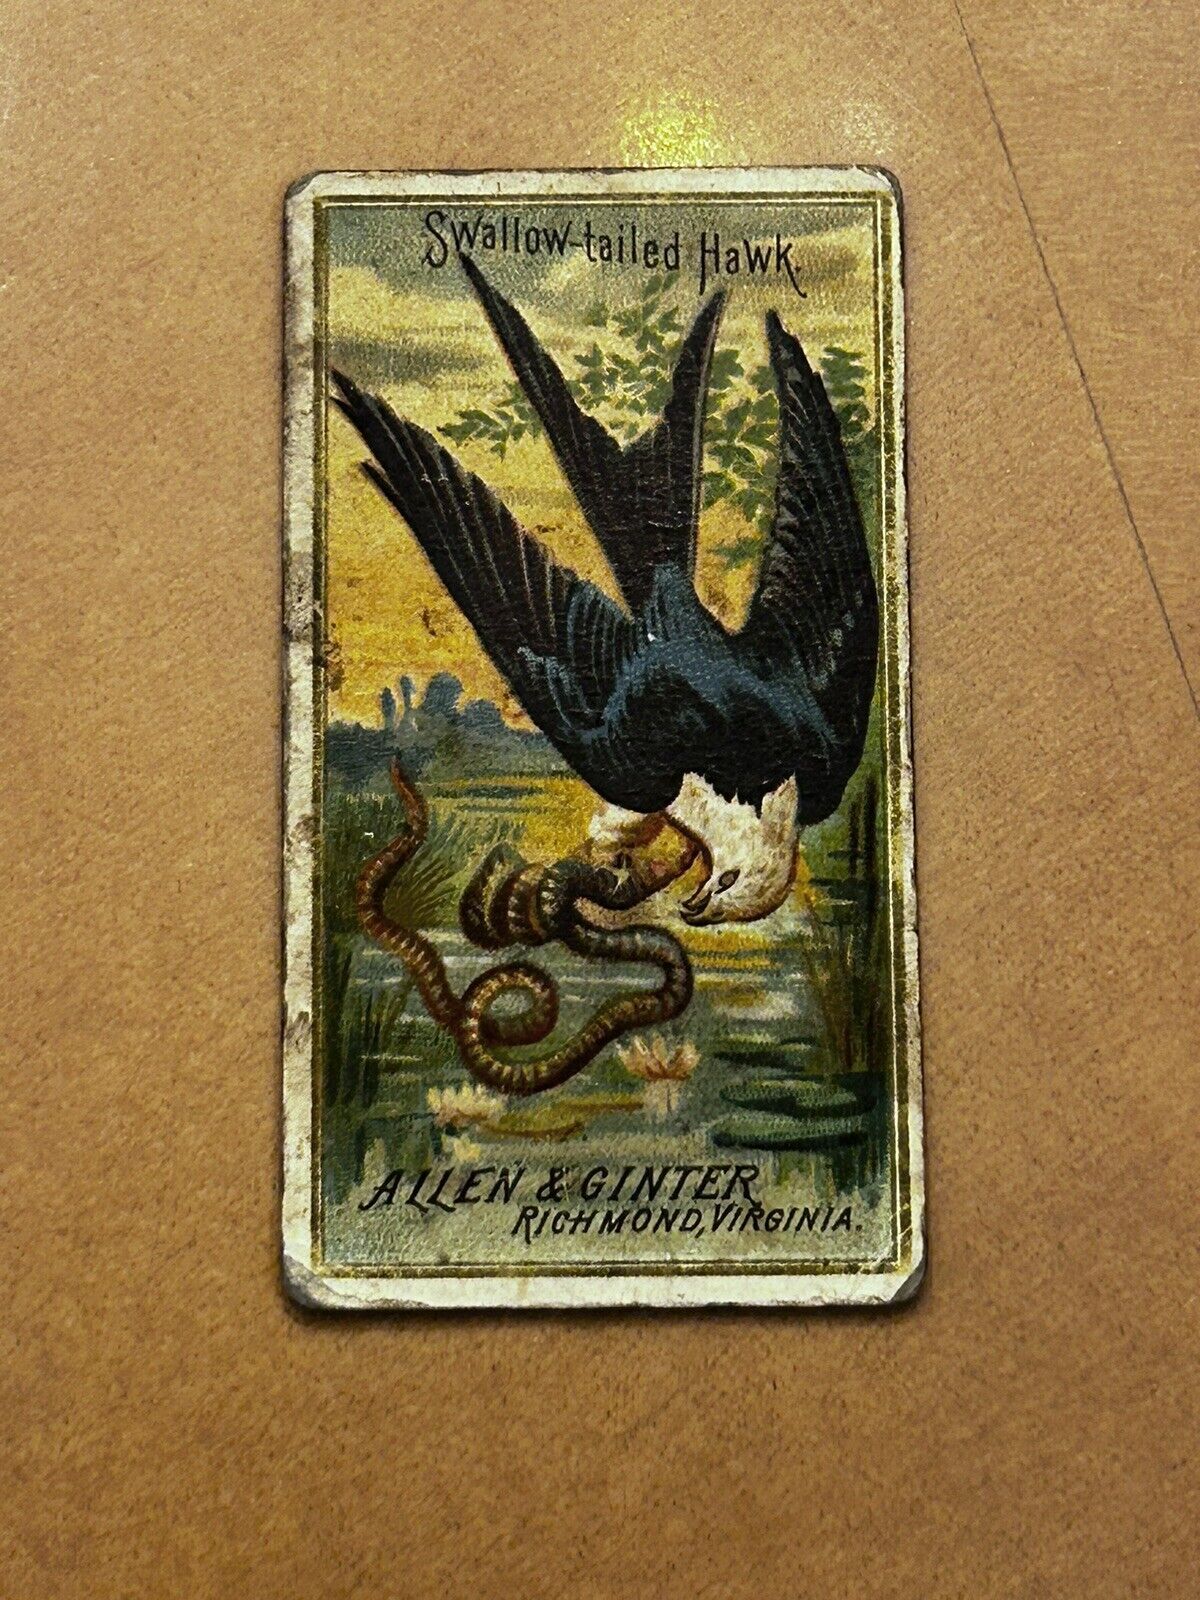 1888 N4 Allen & Ginter Birds of America Swallow-tailed Hawk with snake